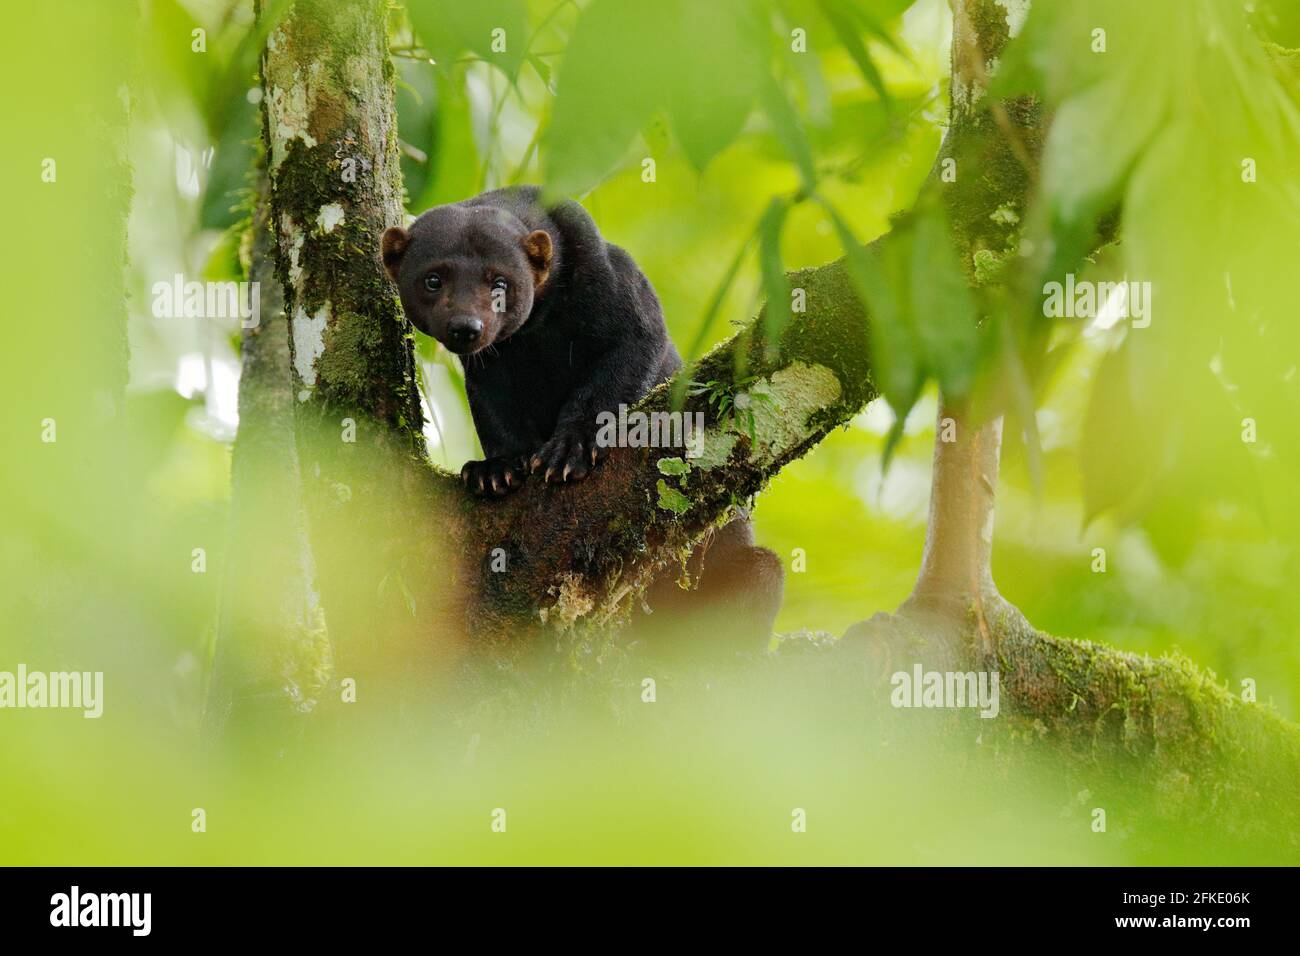 Tayra, Eira barbara, omnivorous animal from the weasel family. Tayra hidden in tropic forest, sitting on the green tree. Wildlife scene from nature, C Stock Photo